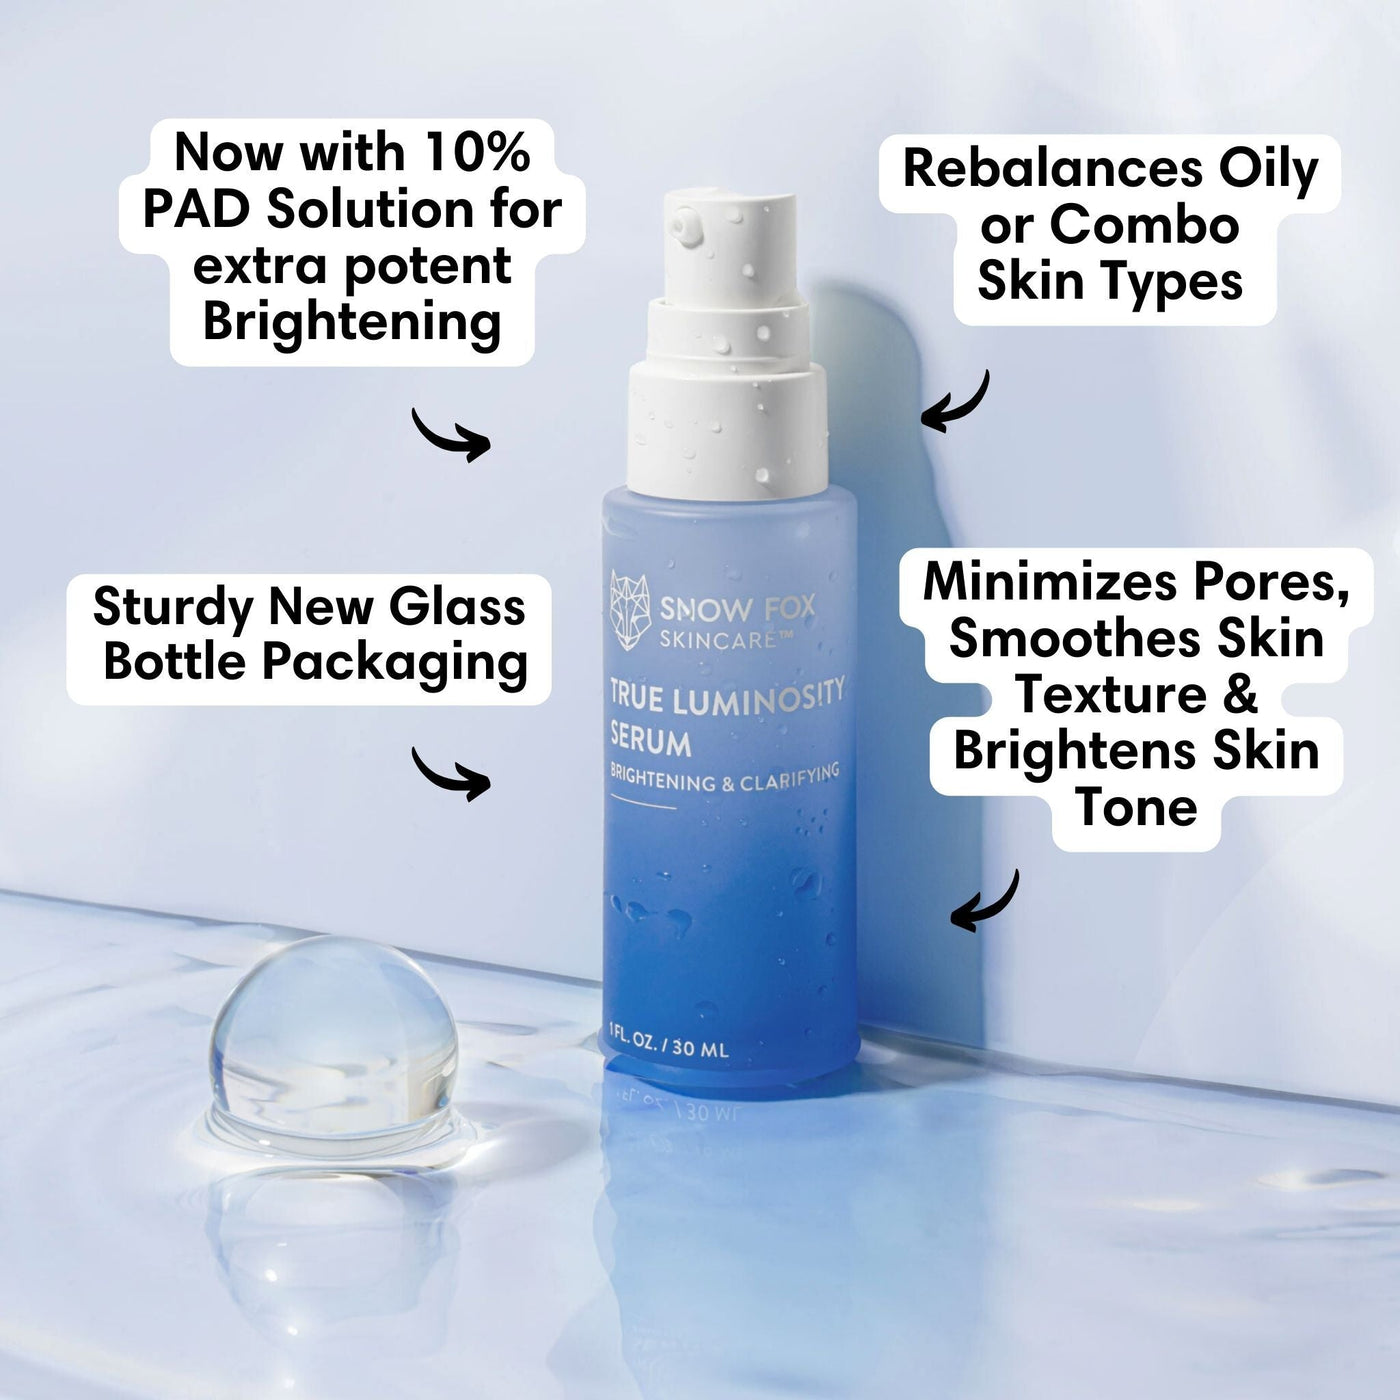 A 10% PAD solution brightening serum that relieves redness, fades hyperpigmentation and minimizes the look of enlarged pores.